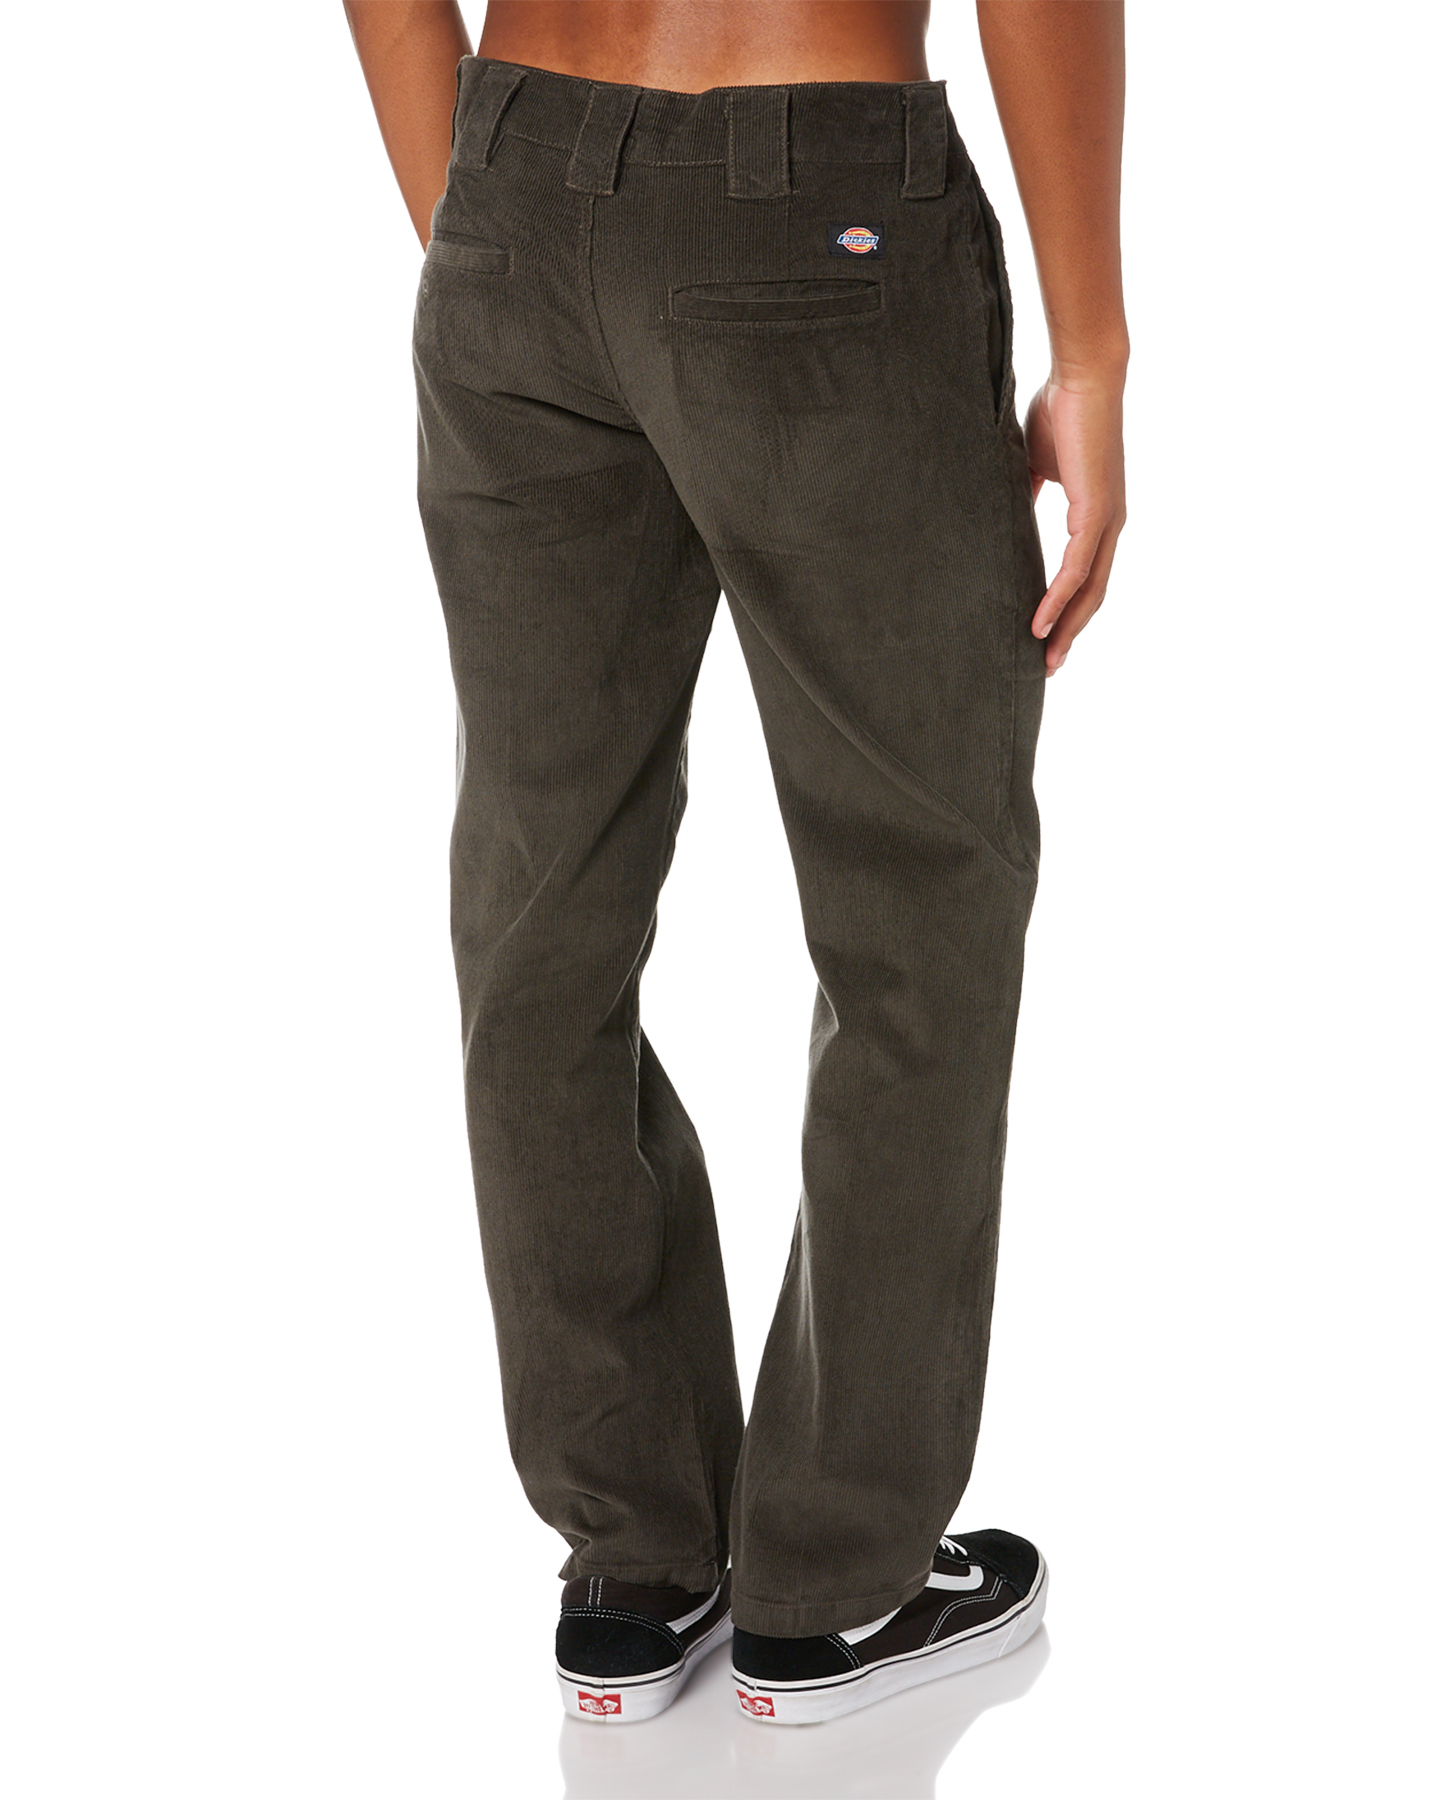 Dickies Sonora 873 Mens Slim Straight Fit Pants - Army Green | SurfStitch